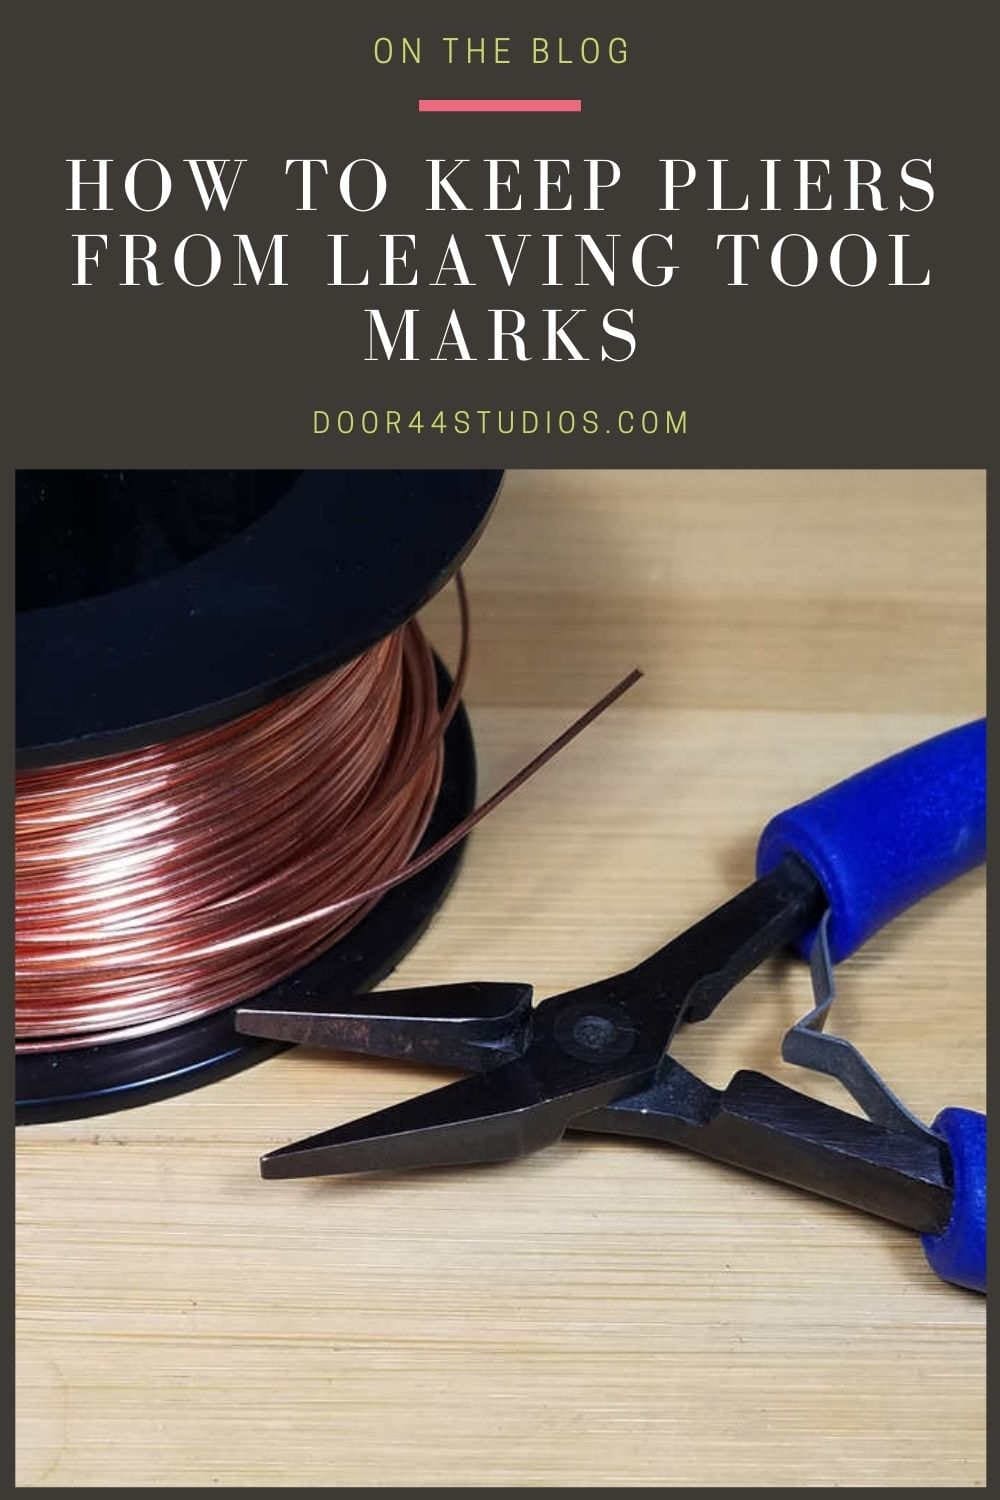 Learn how to keep your jewelry pliers from leaving marks on your wires with this free wirework basics tutorial from Door 44 Studios. The path to wire weaving mastery begins here.